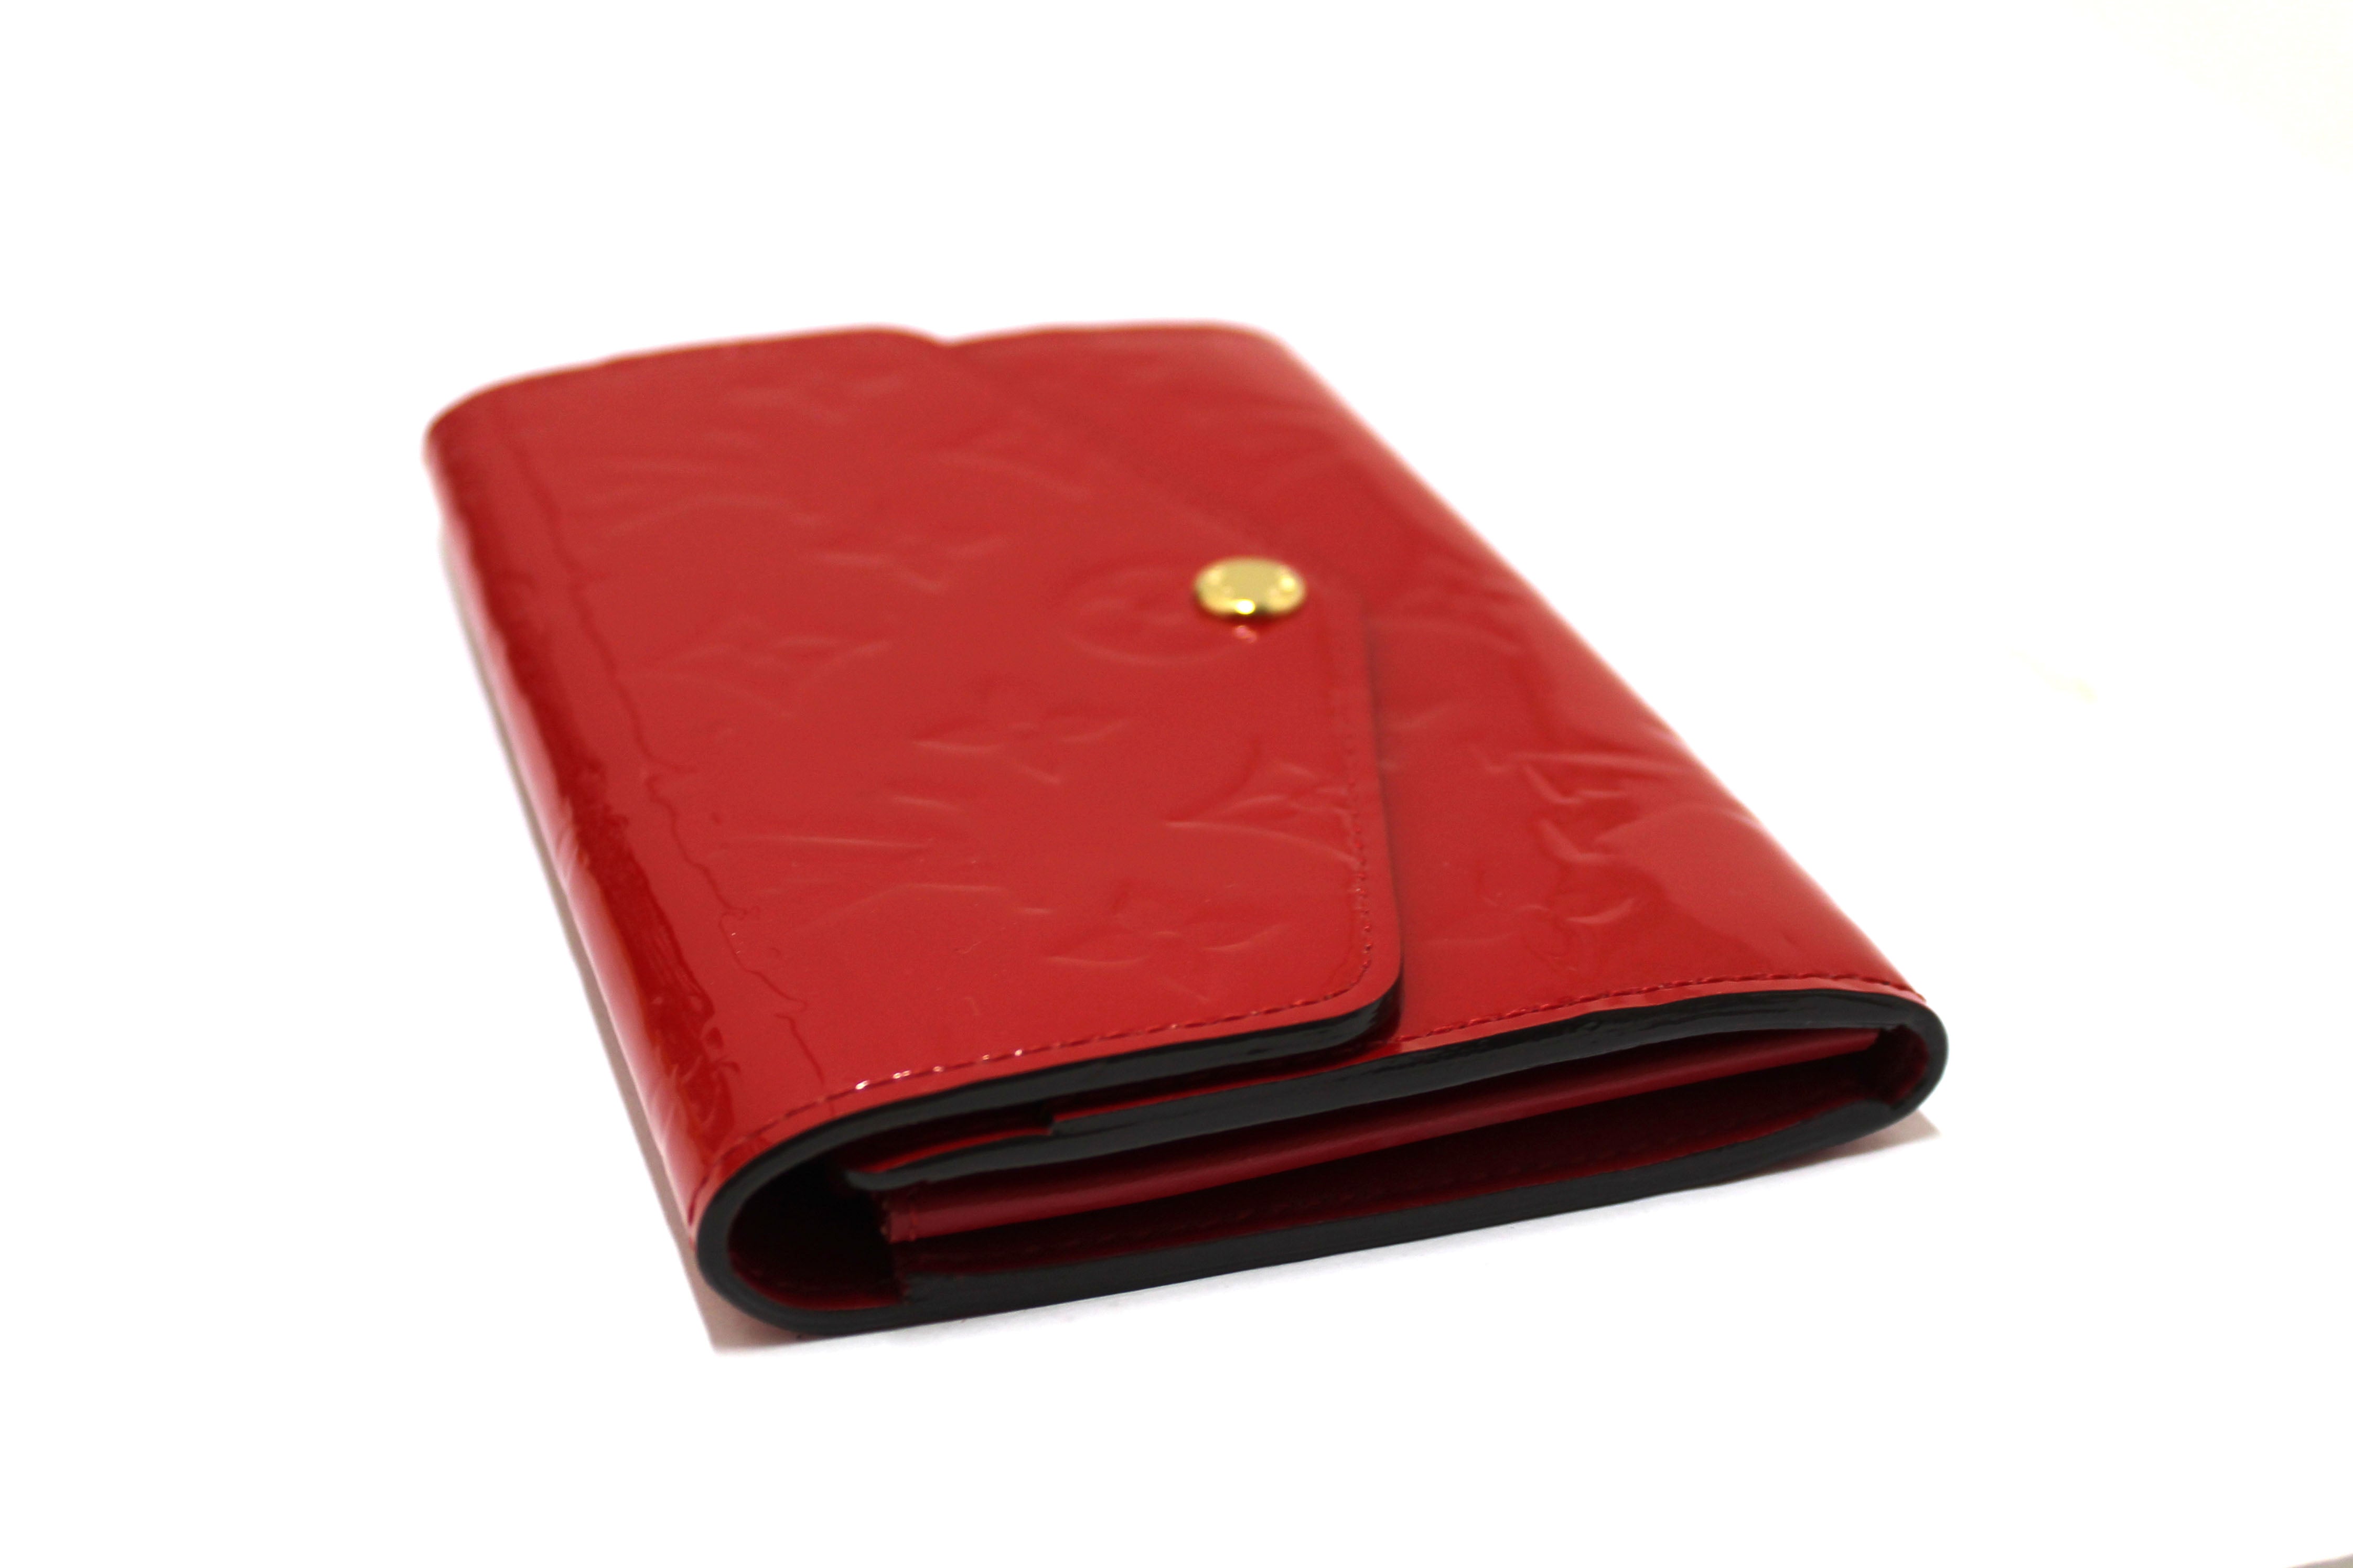 Authentic Louis Vuitton Red Monogram Vernis Patent Leather Compact Curieuse Wallet